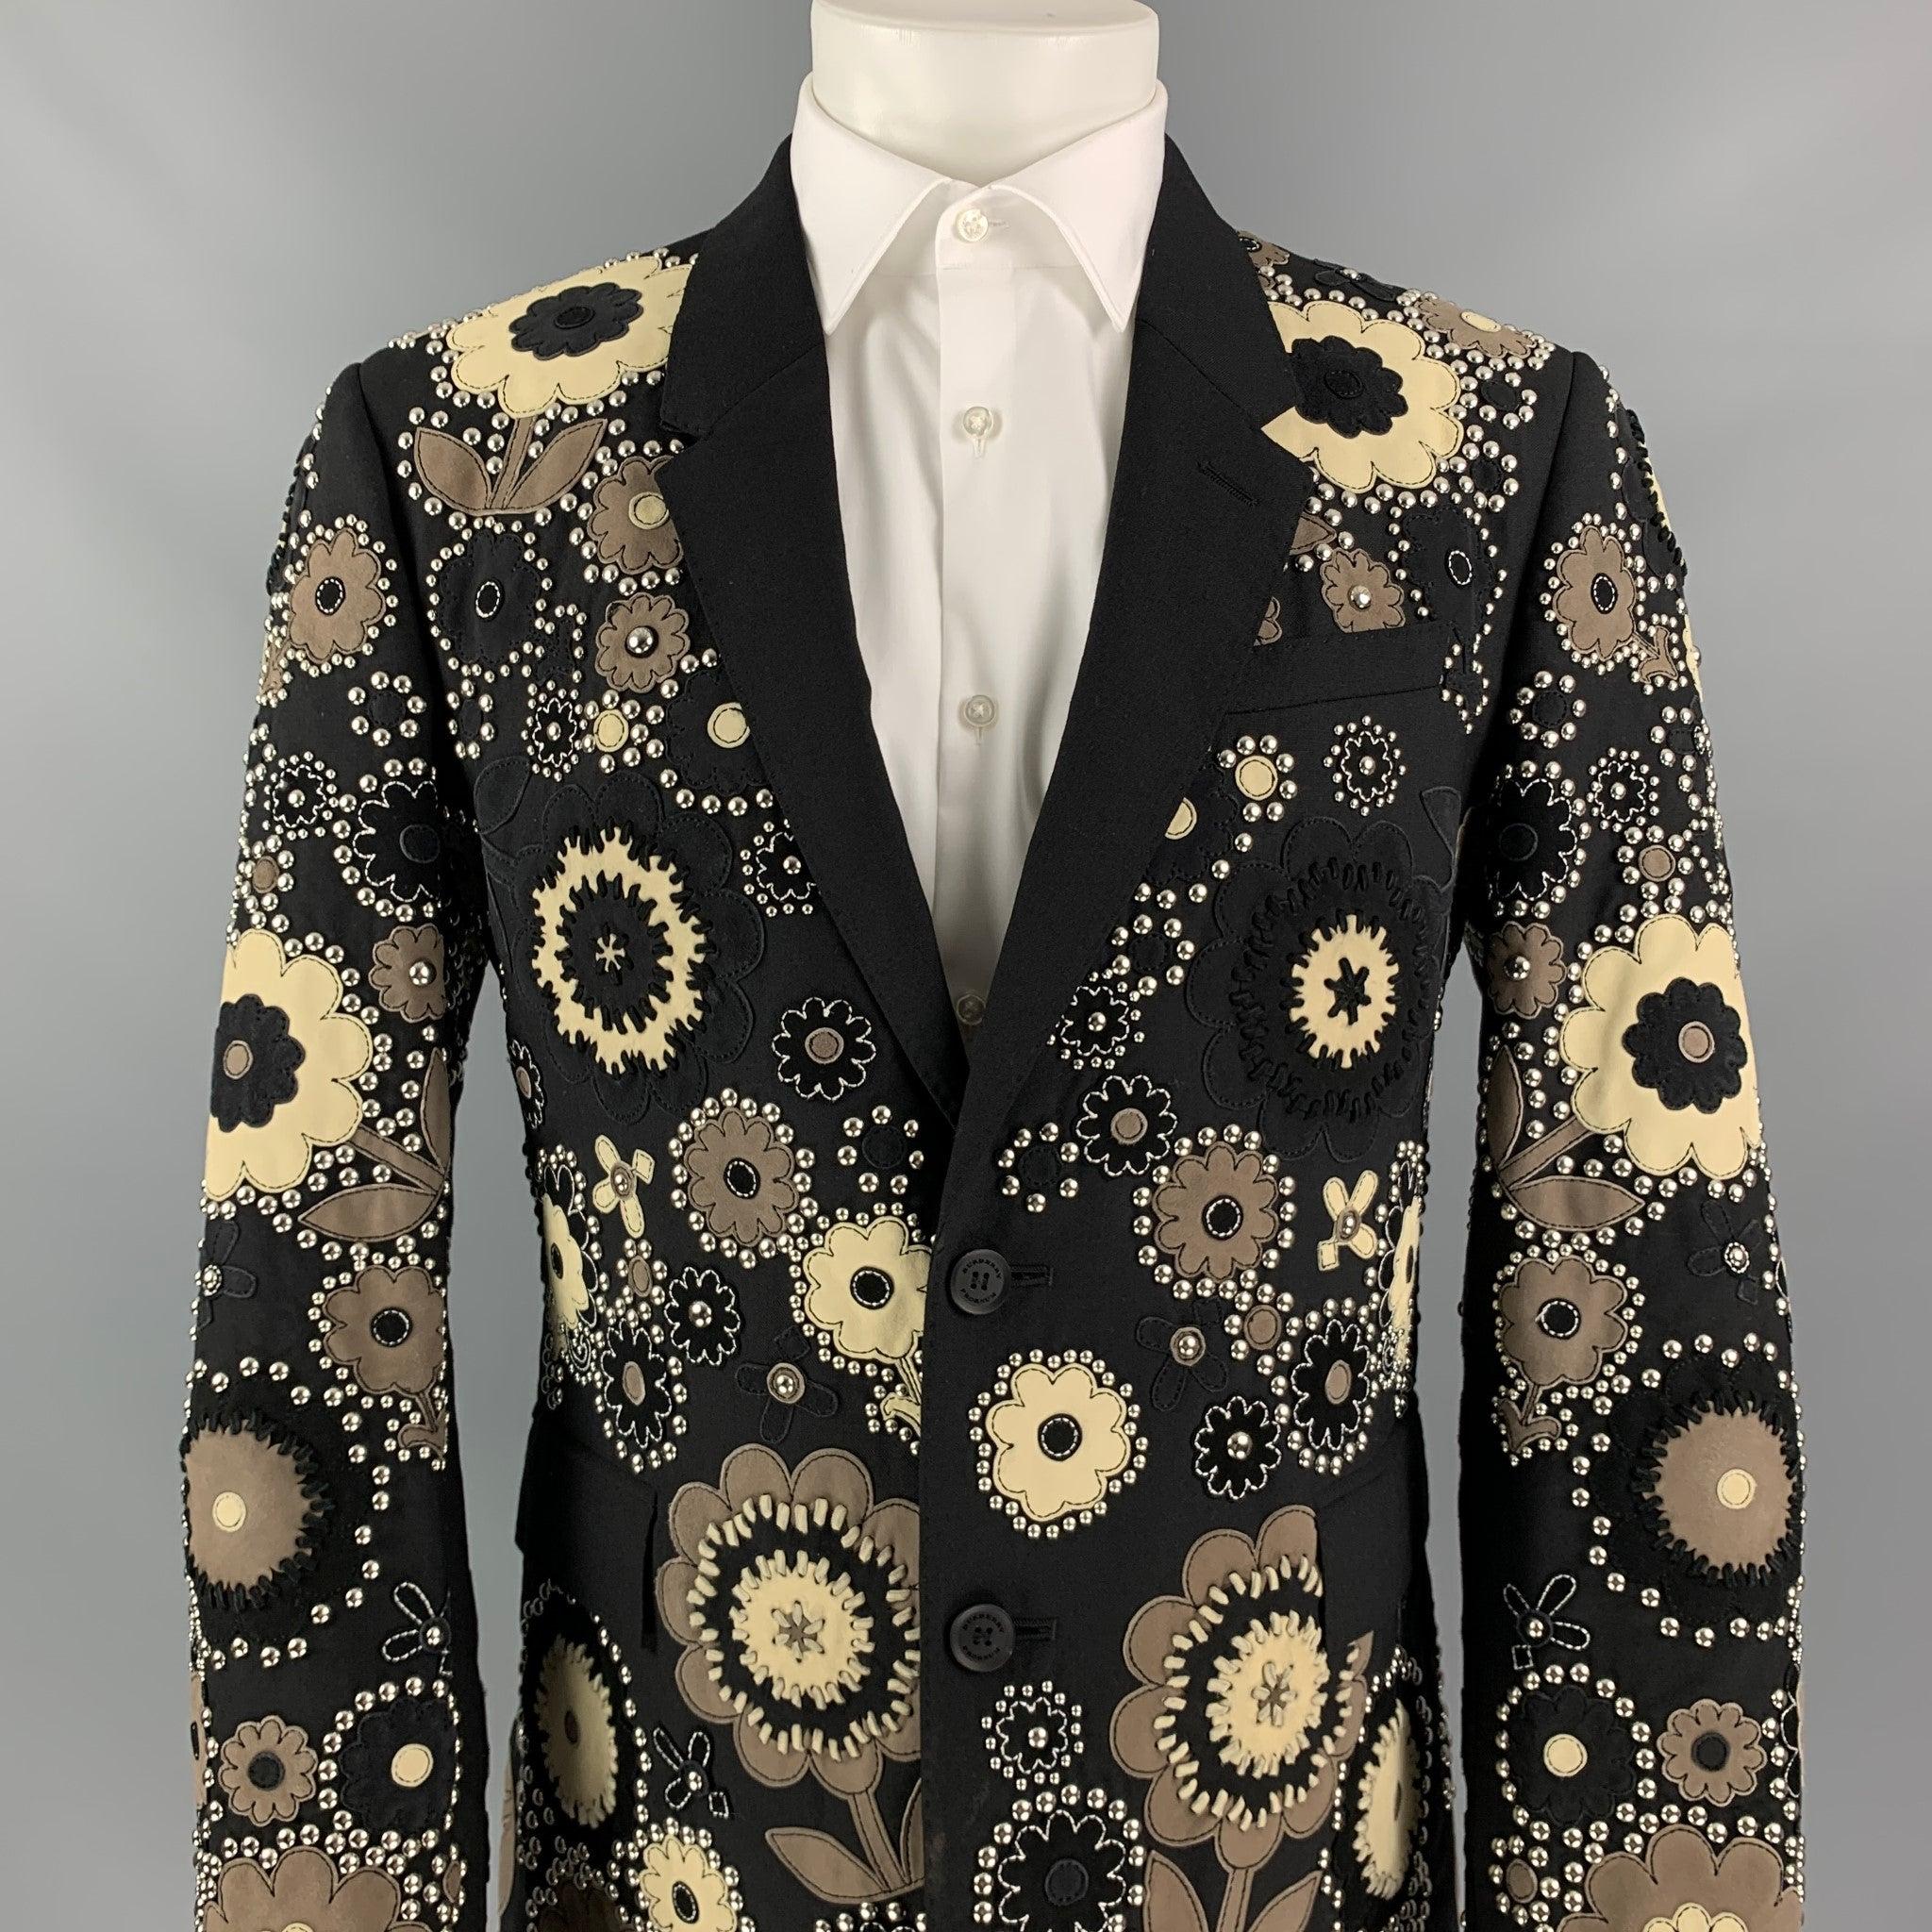 BURBERRY PRORSUM Spring 2016 Size 40 Cream Embellished Floral Sport Coat In Good Condition For Sale In San Francisco, CA